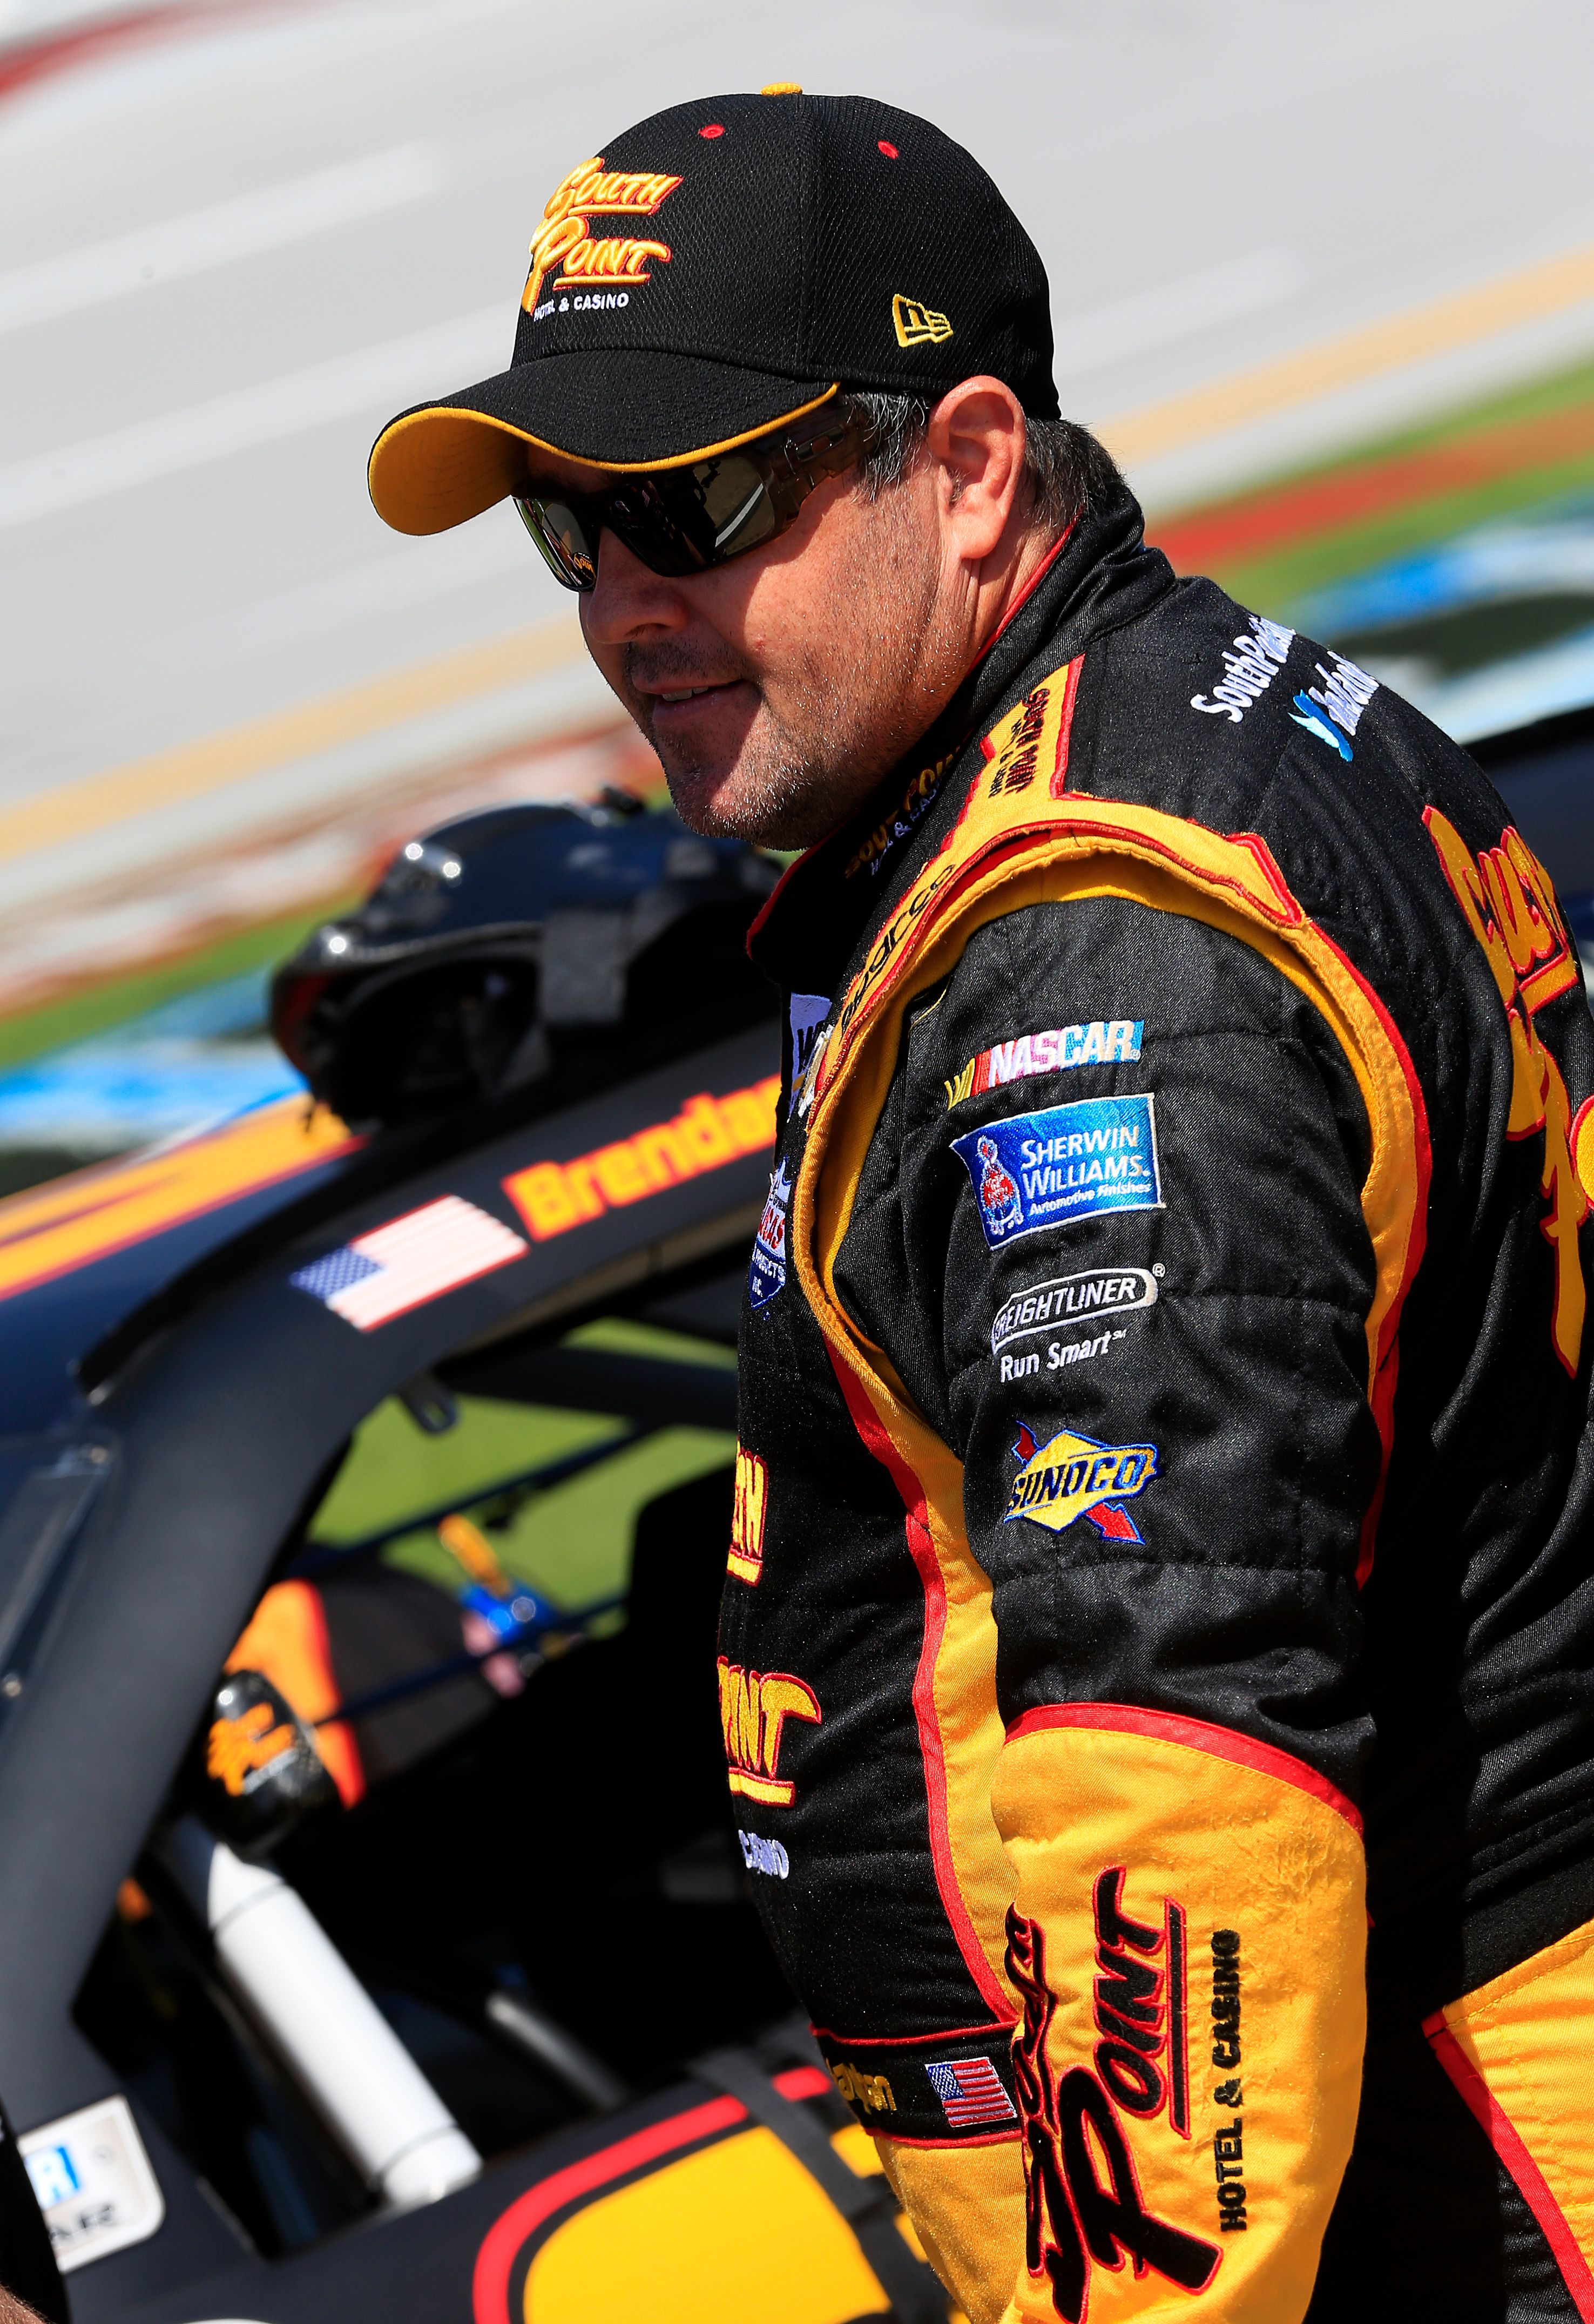 Brendan Gaughan, driver of the #62 South Point Chevrolet, stands on the grid at qualifying for the NASCAR XFINITY Series Winn Dixie 300 at Talladega Superspeedway on May 2, 2015 | Photo: Getty Images